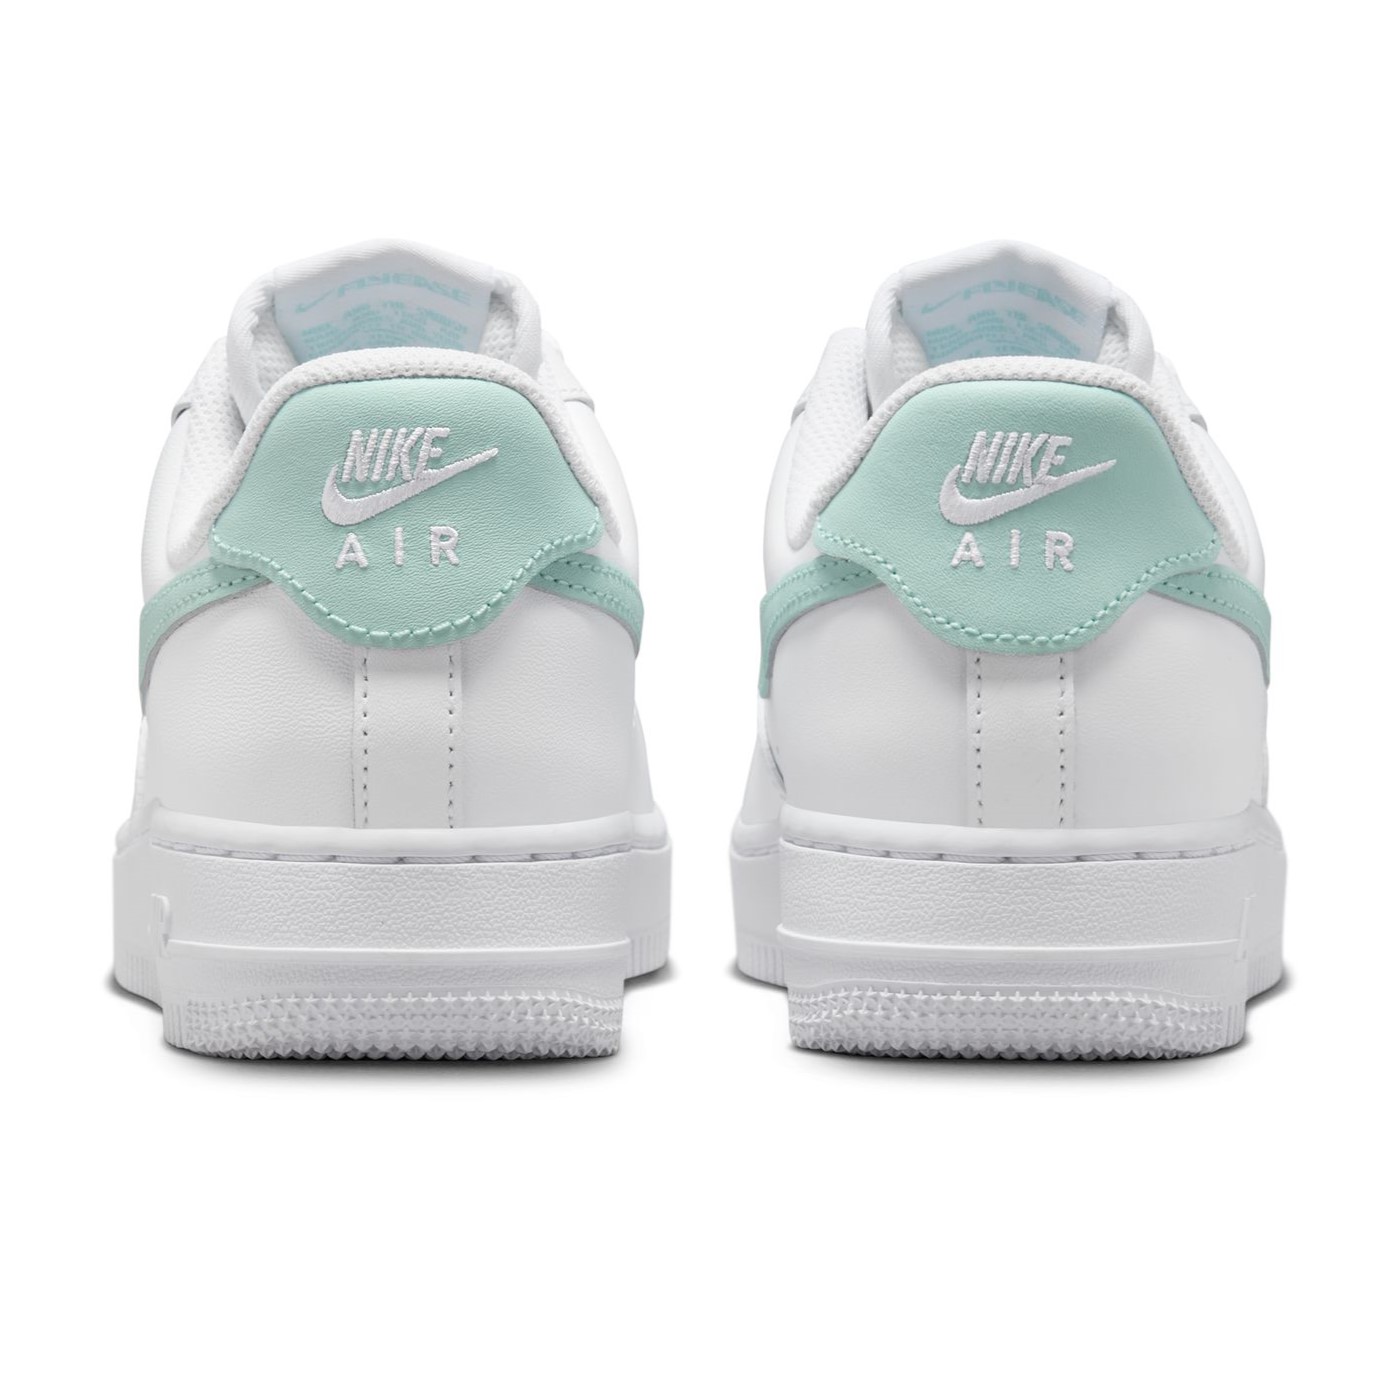 GIÀY NIKE NỮ AIR FORCE 1 07 EASYON WHITE ICE JADE WOMENS SHOES DX5883-101 10